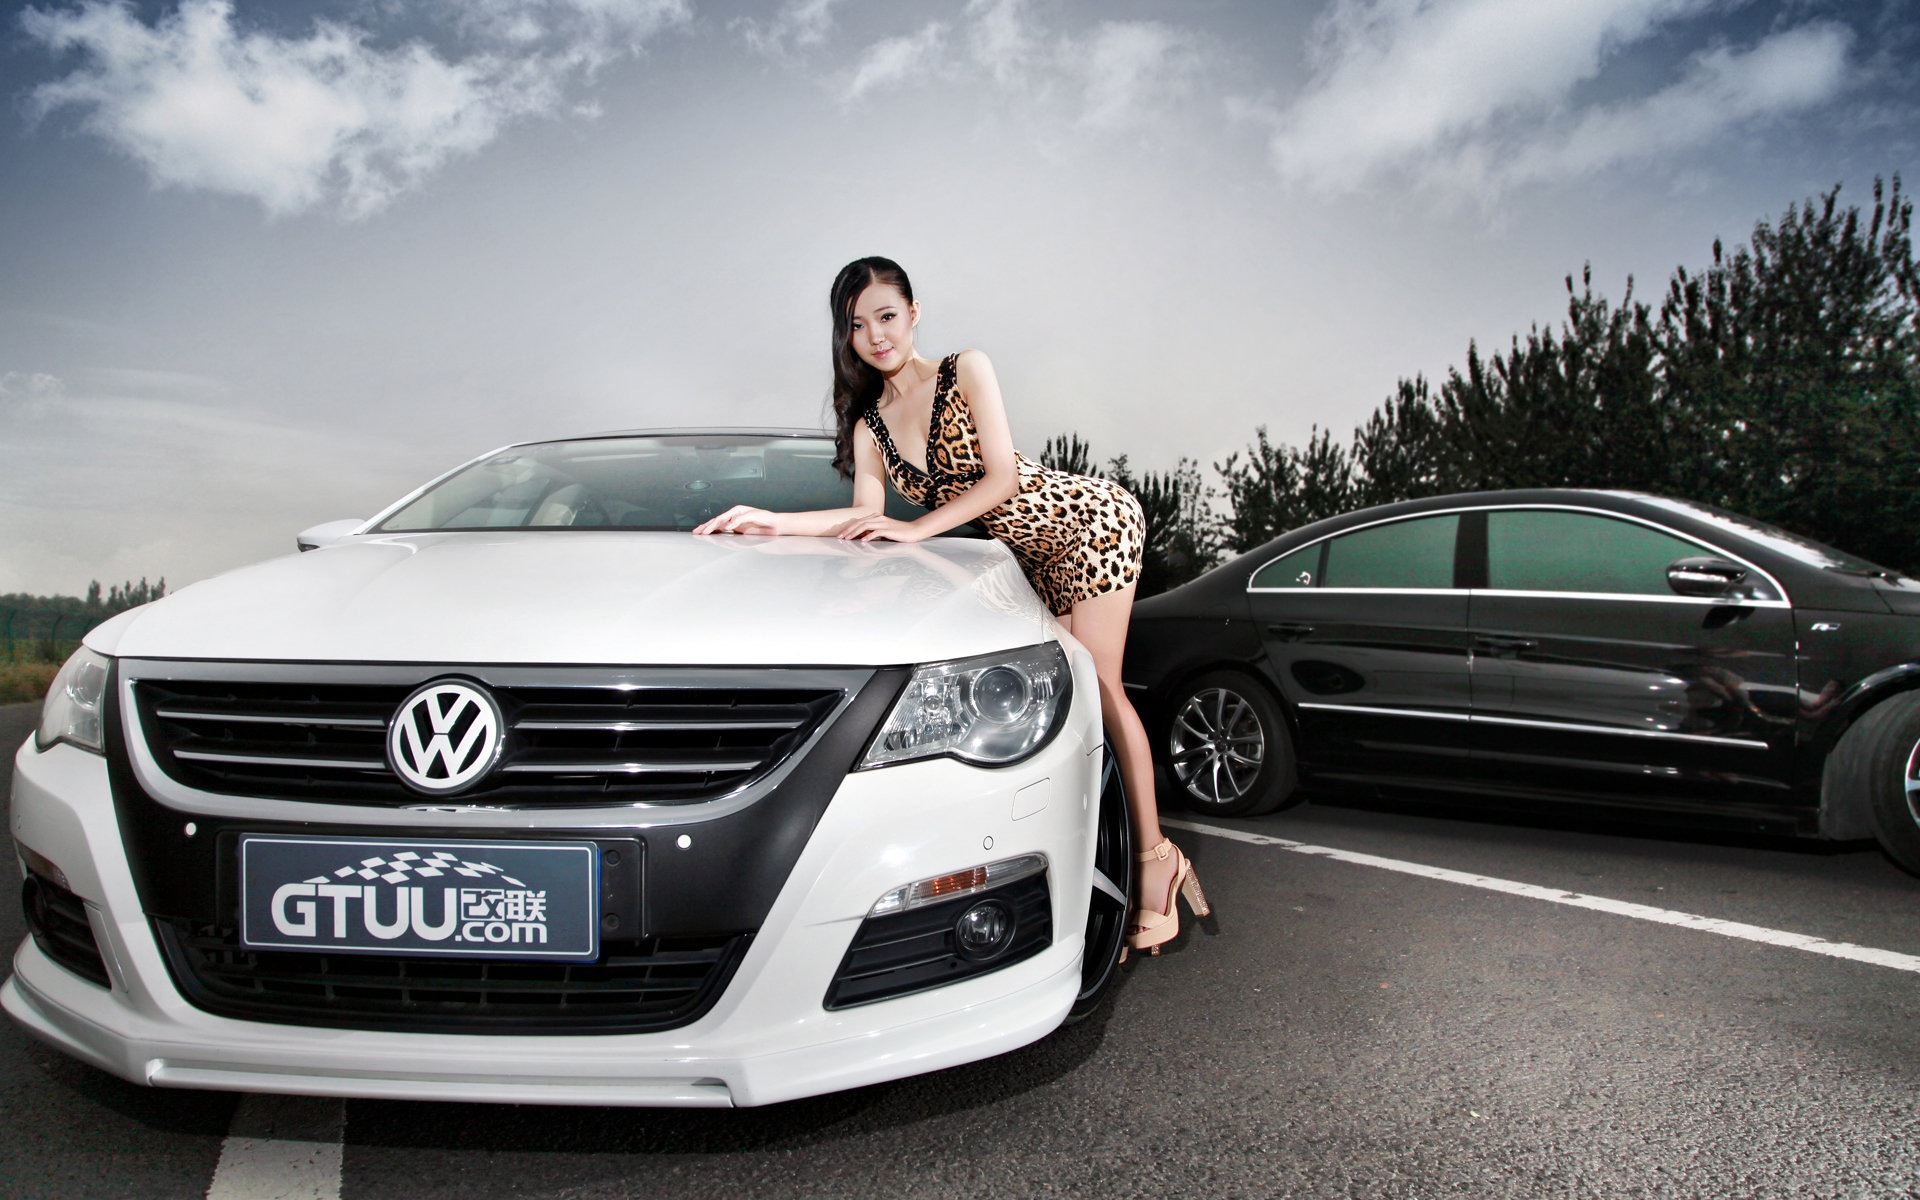 Beautiful leopard dress girl with Volkswagen sports car wallpapers #10 - 1920x1200